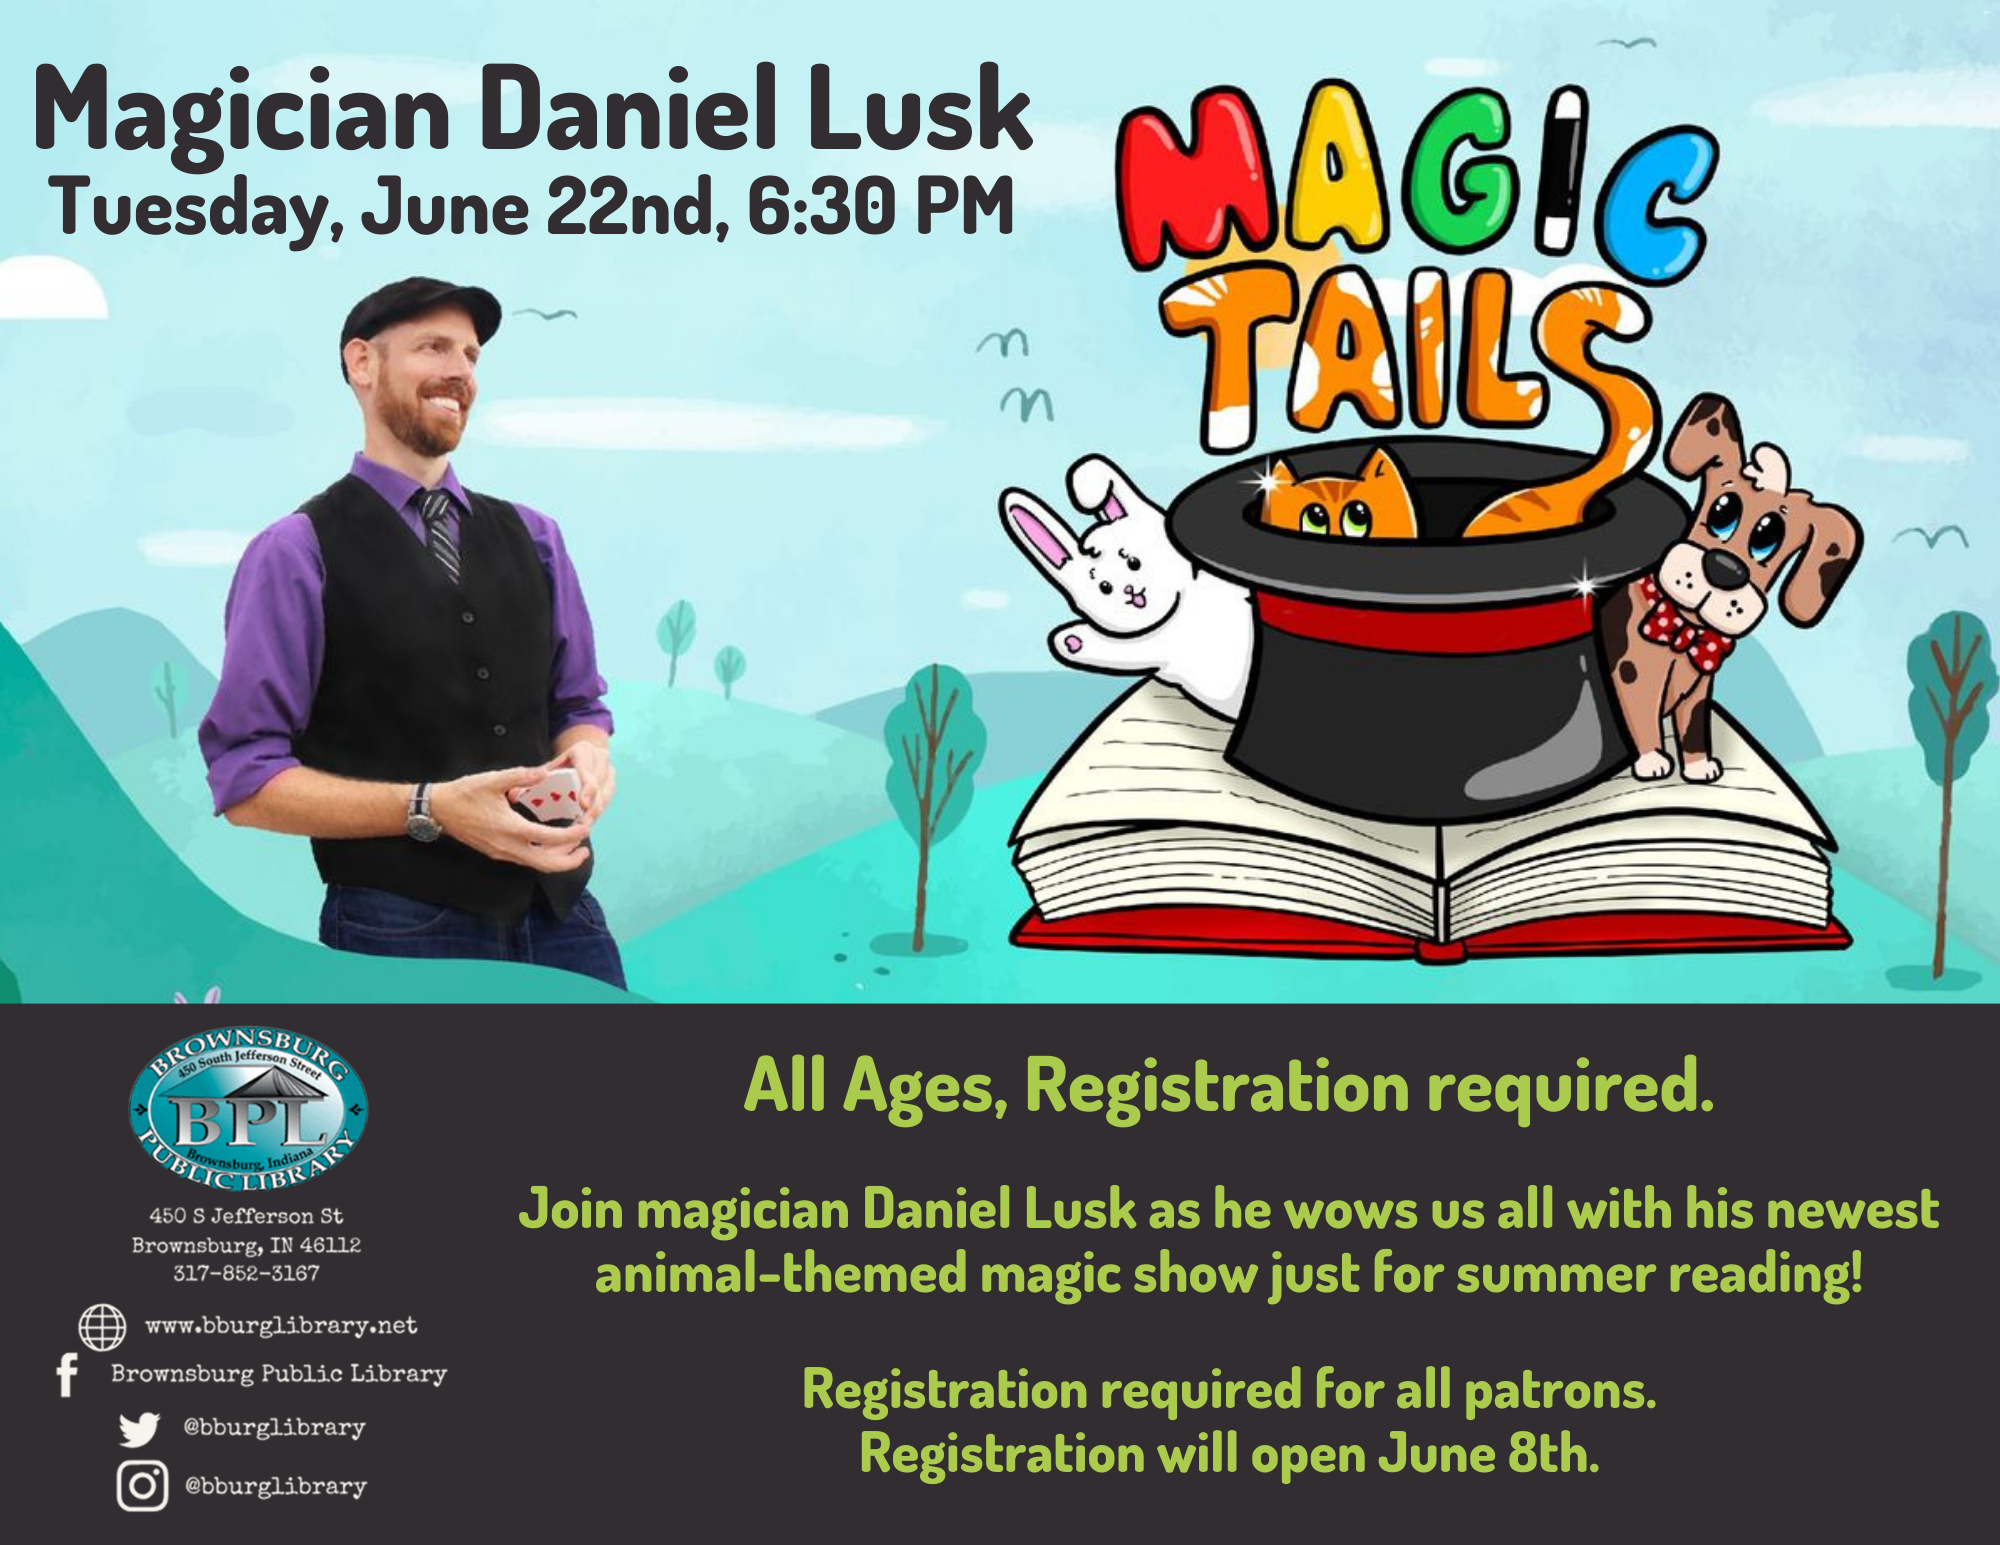 Hilly background with blue sky & trees with magician Daniel Lusk looking at an illustrated hat on a book with a bunny and the words Magic Tails above it.